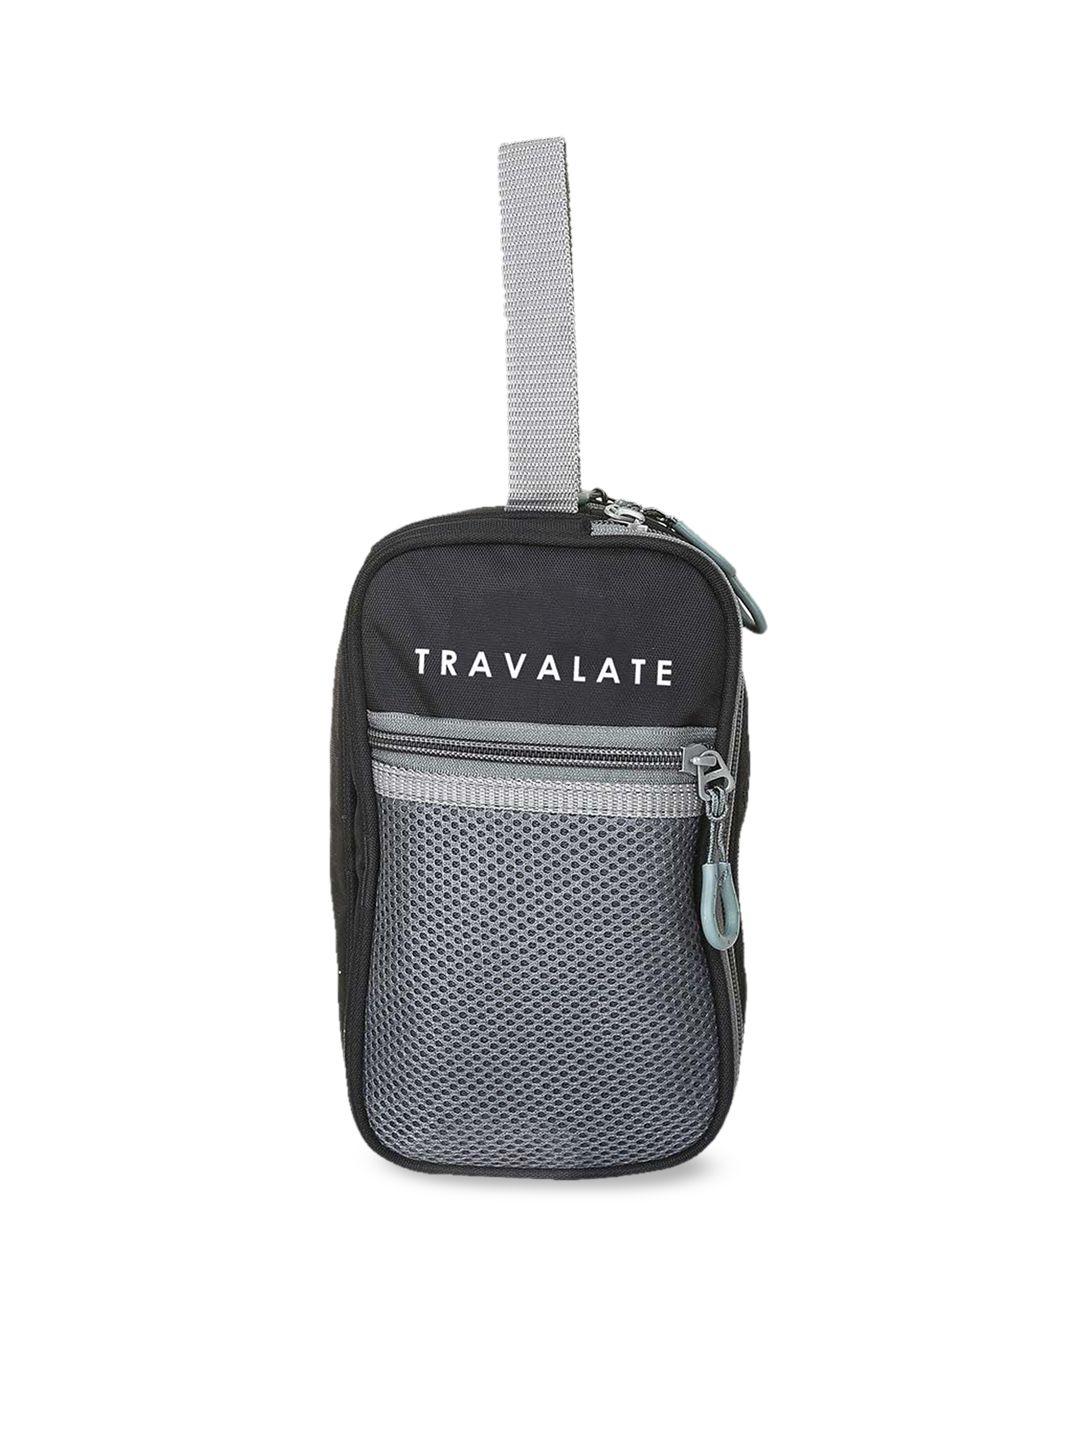 travalate black solid travel cosmetic makeup pouch